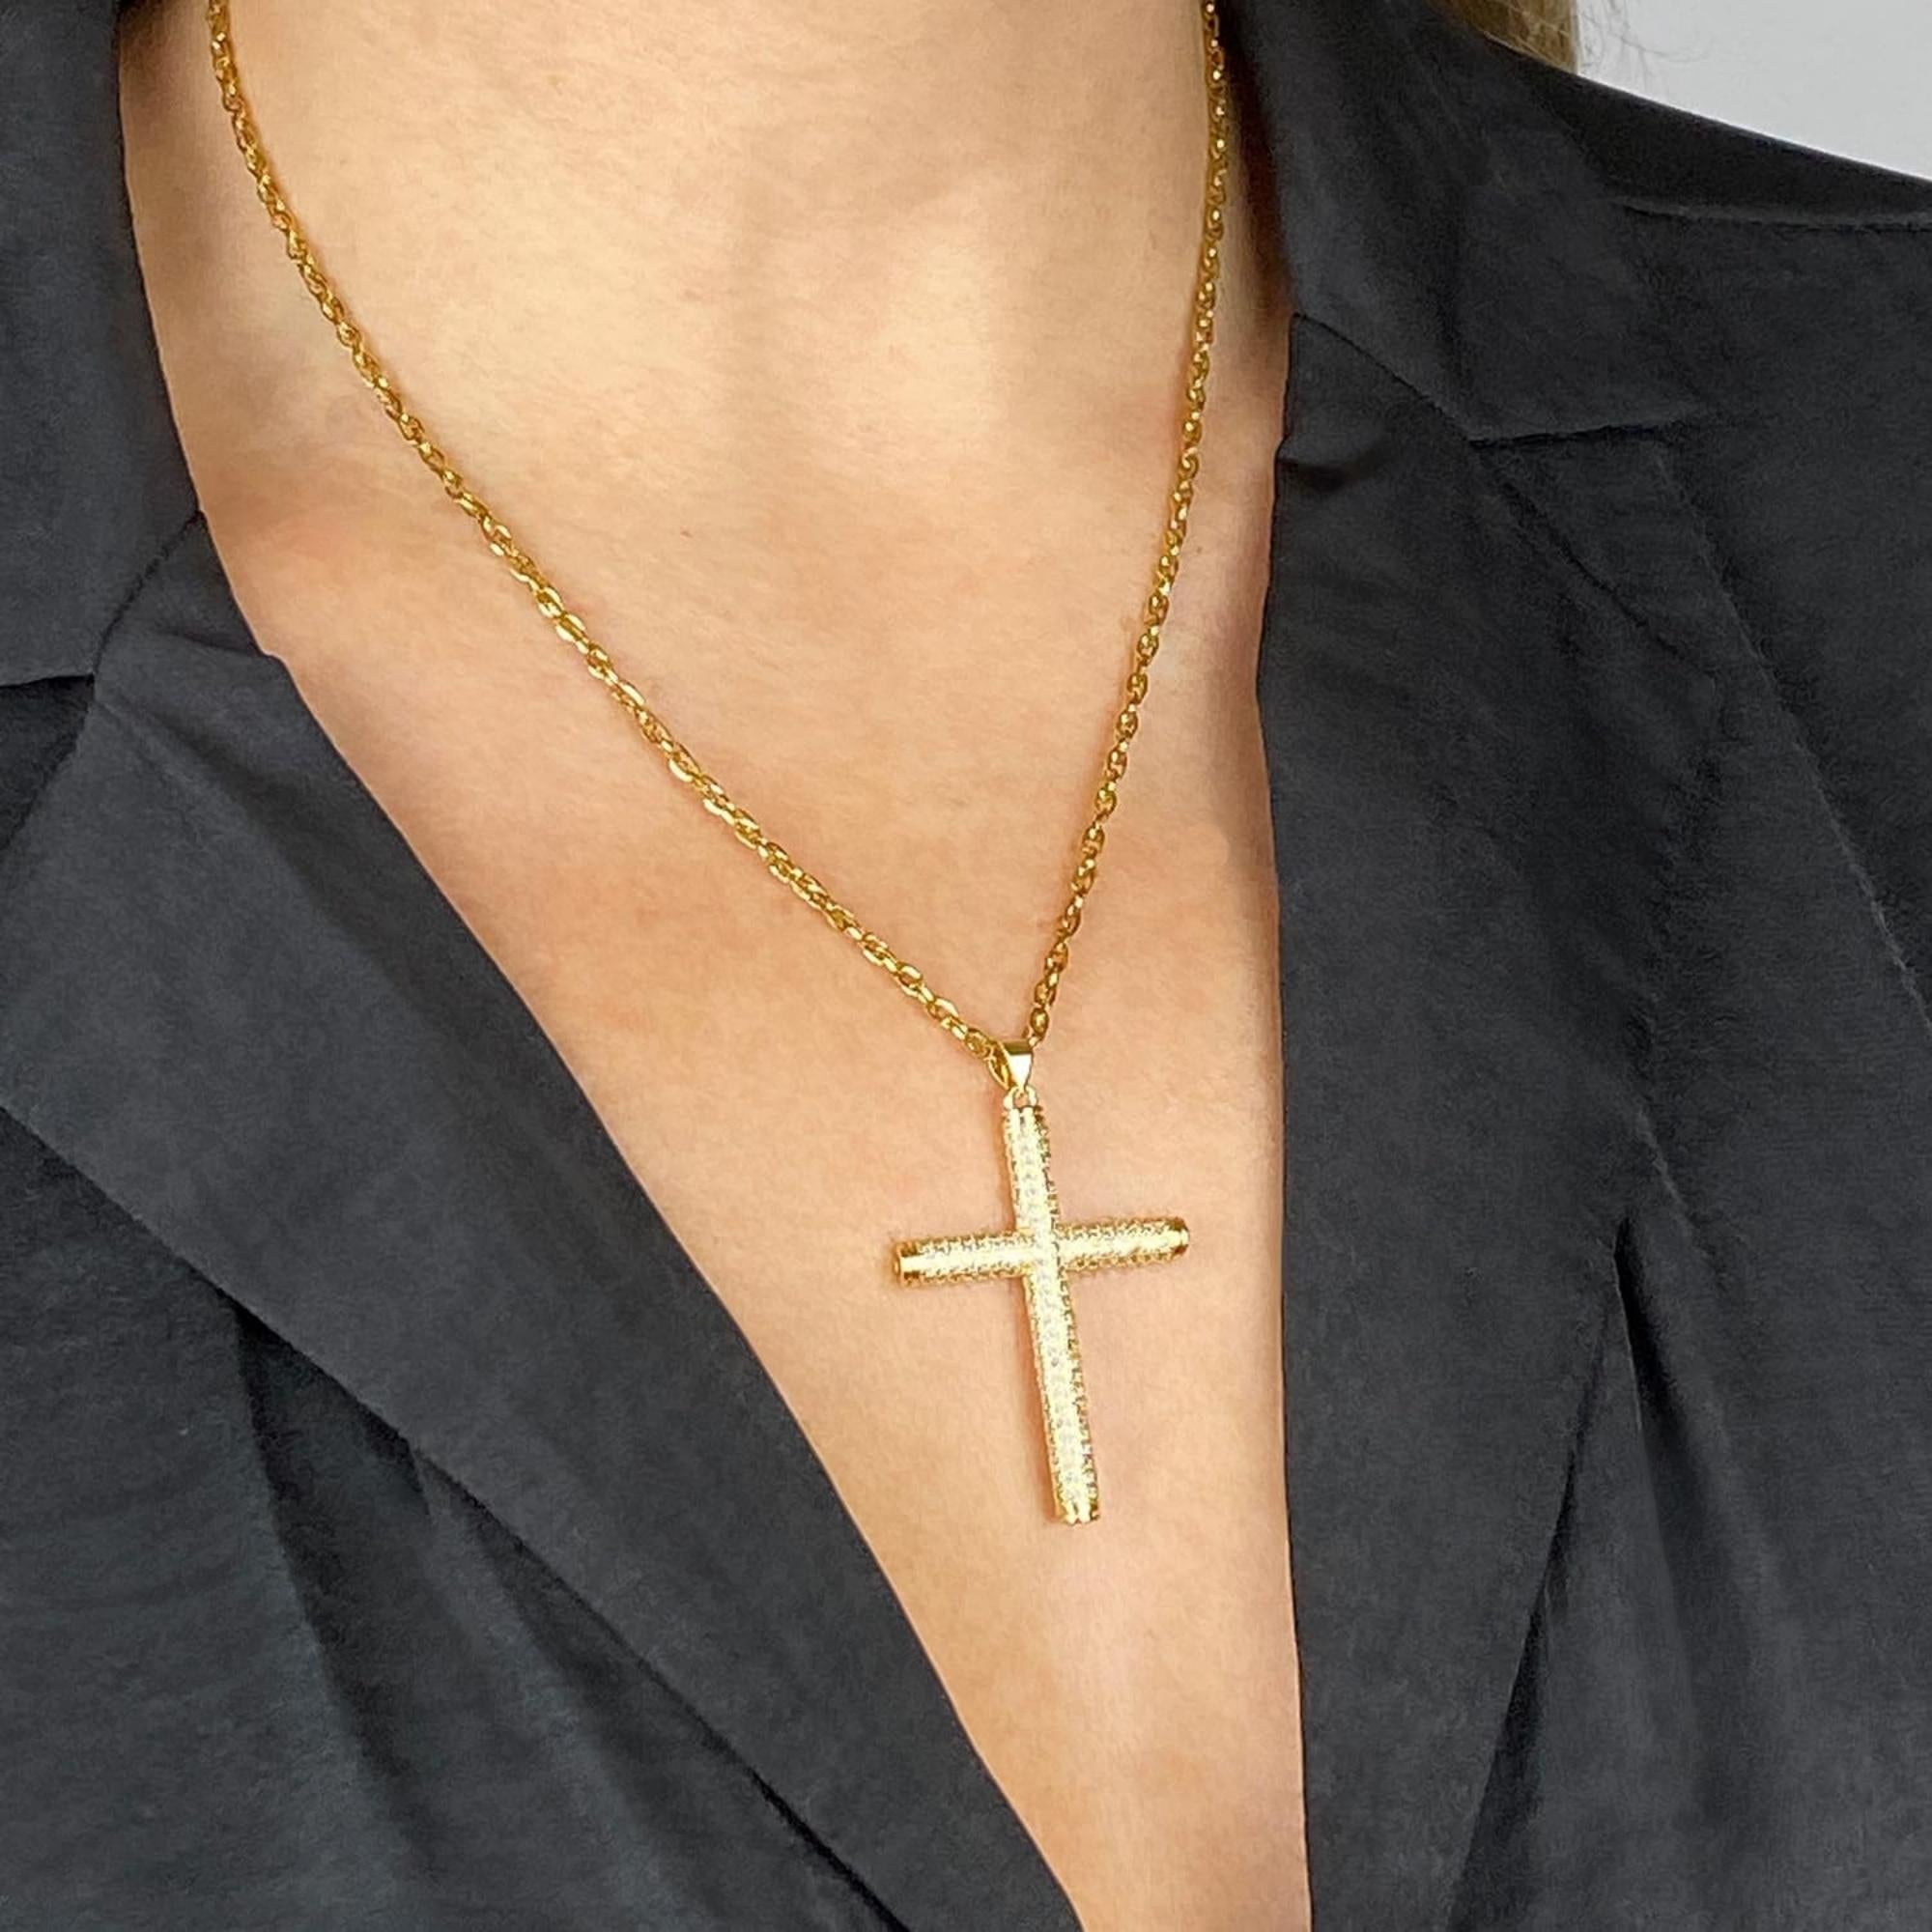 BEST SELLER Cross Necklace Women Small Gold Filled Crystal Crosses Pendant  Girls Womens Minimalist Necklaces Delicate Chain - Etsy | Diamond cross  necklaces, Diamond cross, Cross necklace